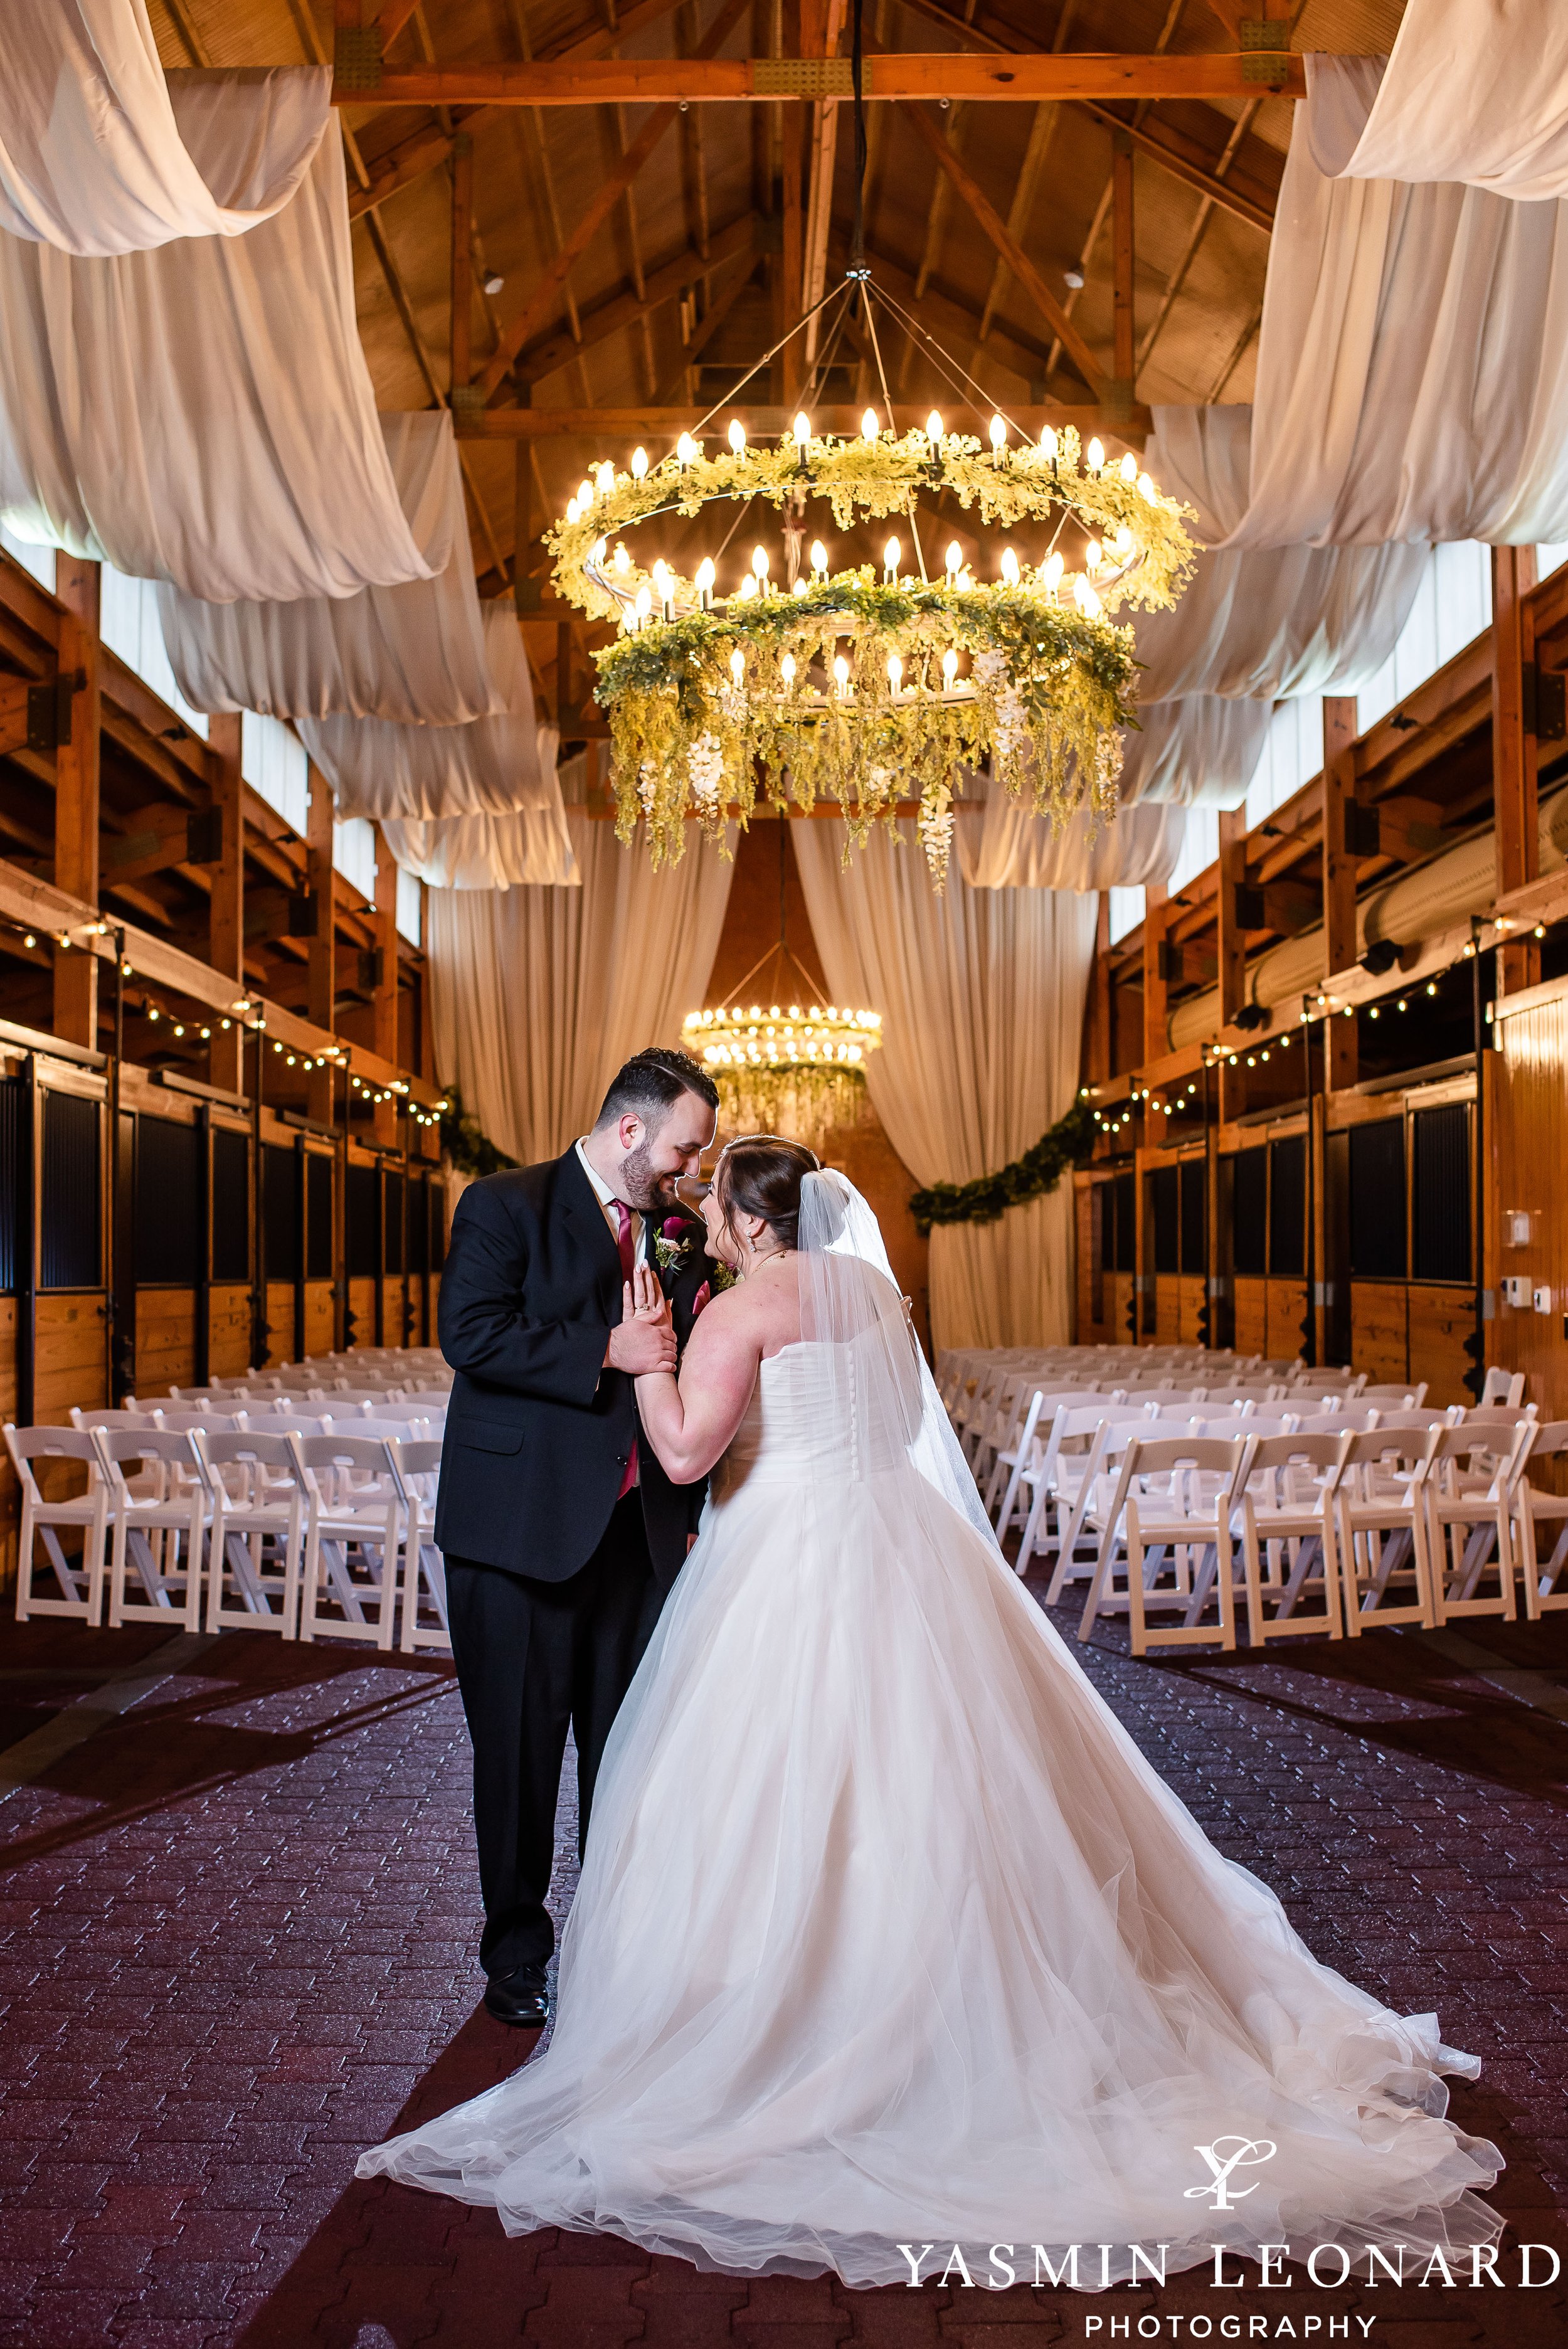 Legacy Stables and Events - Legacy Stables Wedding - Morgan and Logan - NC Weddings - Marry Me NC - Triad Weddings - Best Wedding Photographer Near Me - Best Photographer in High Point - Yasmin Leonard Photography-26.jpg